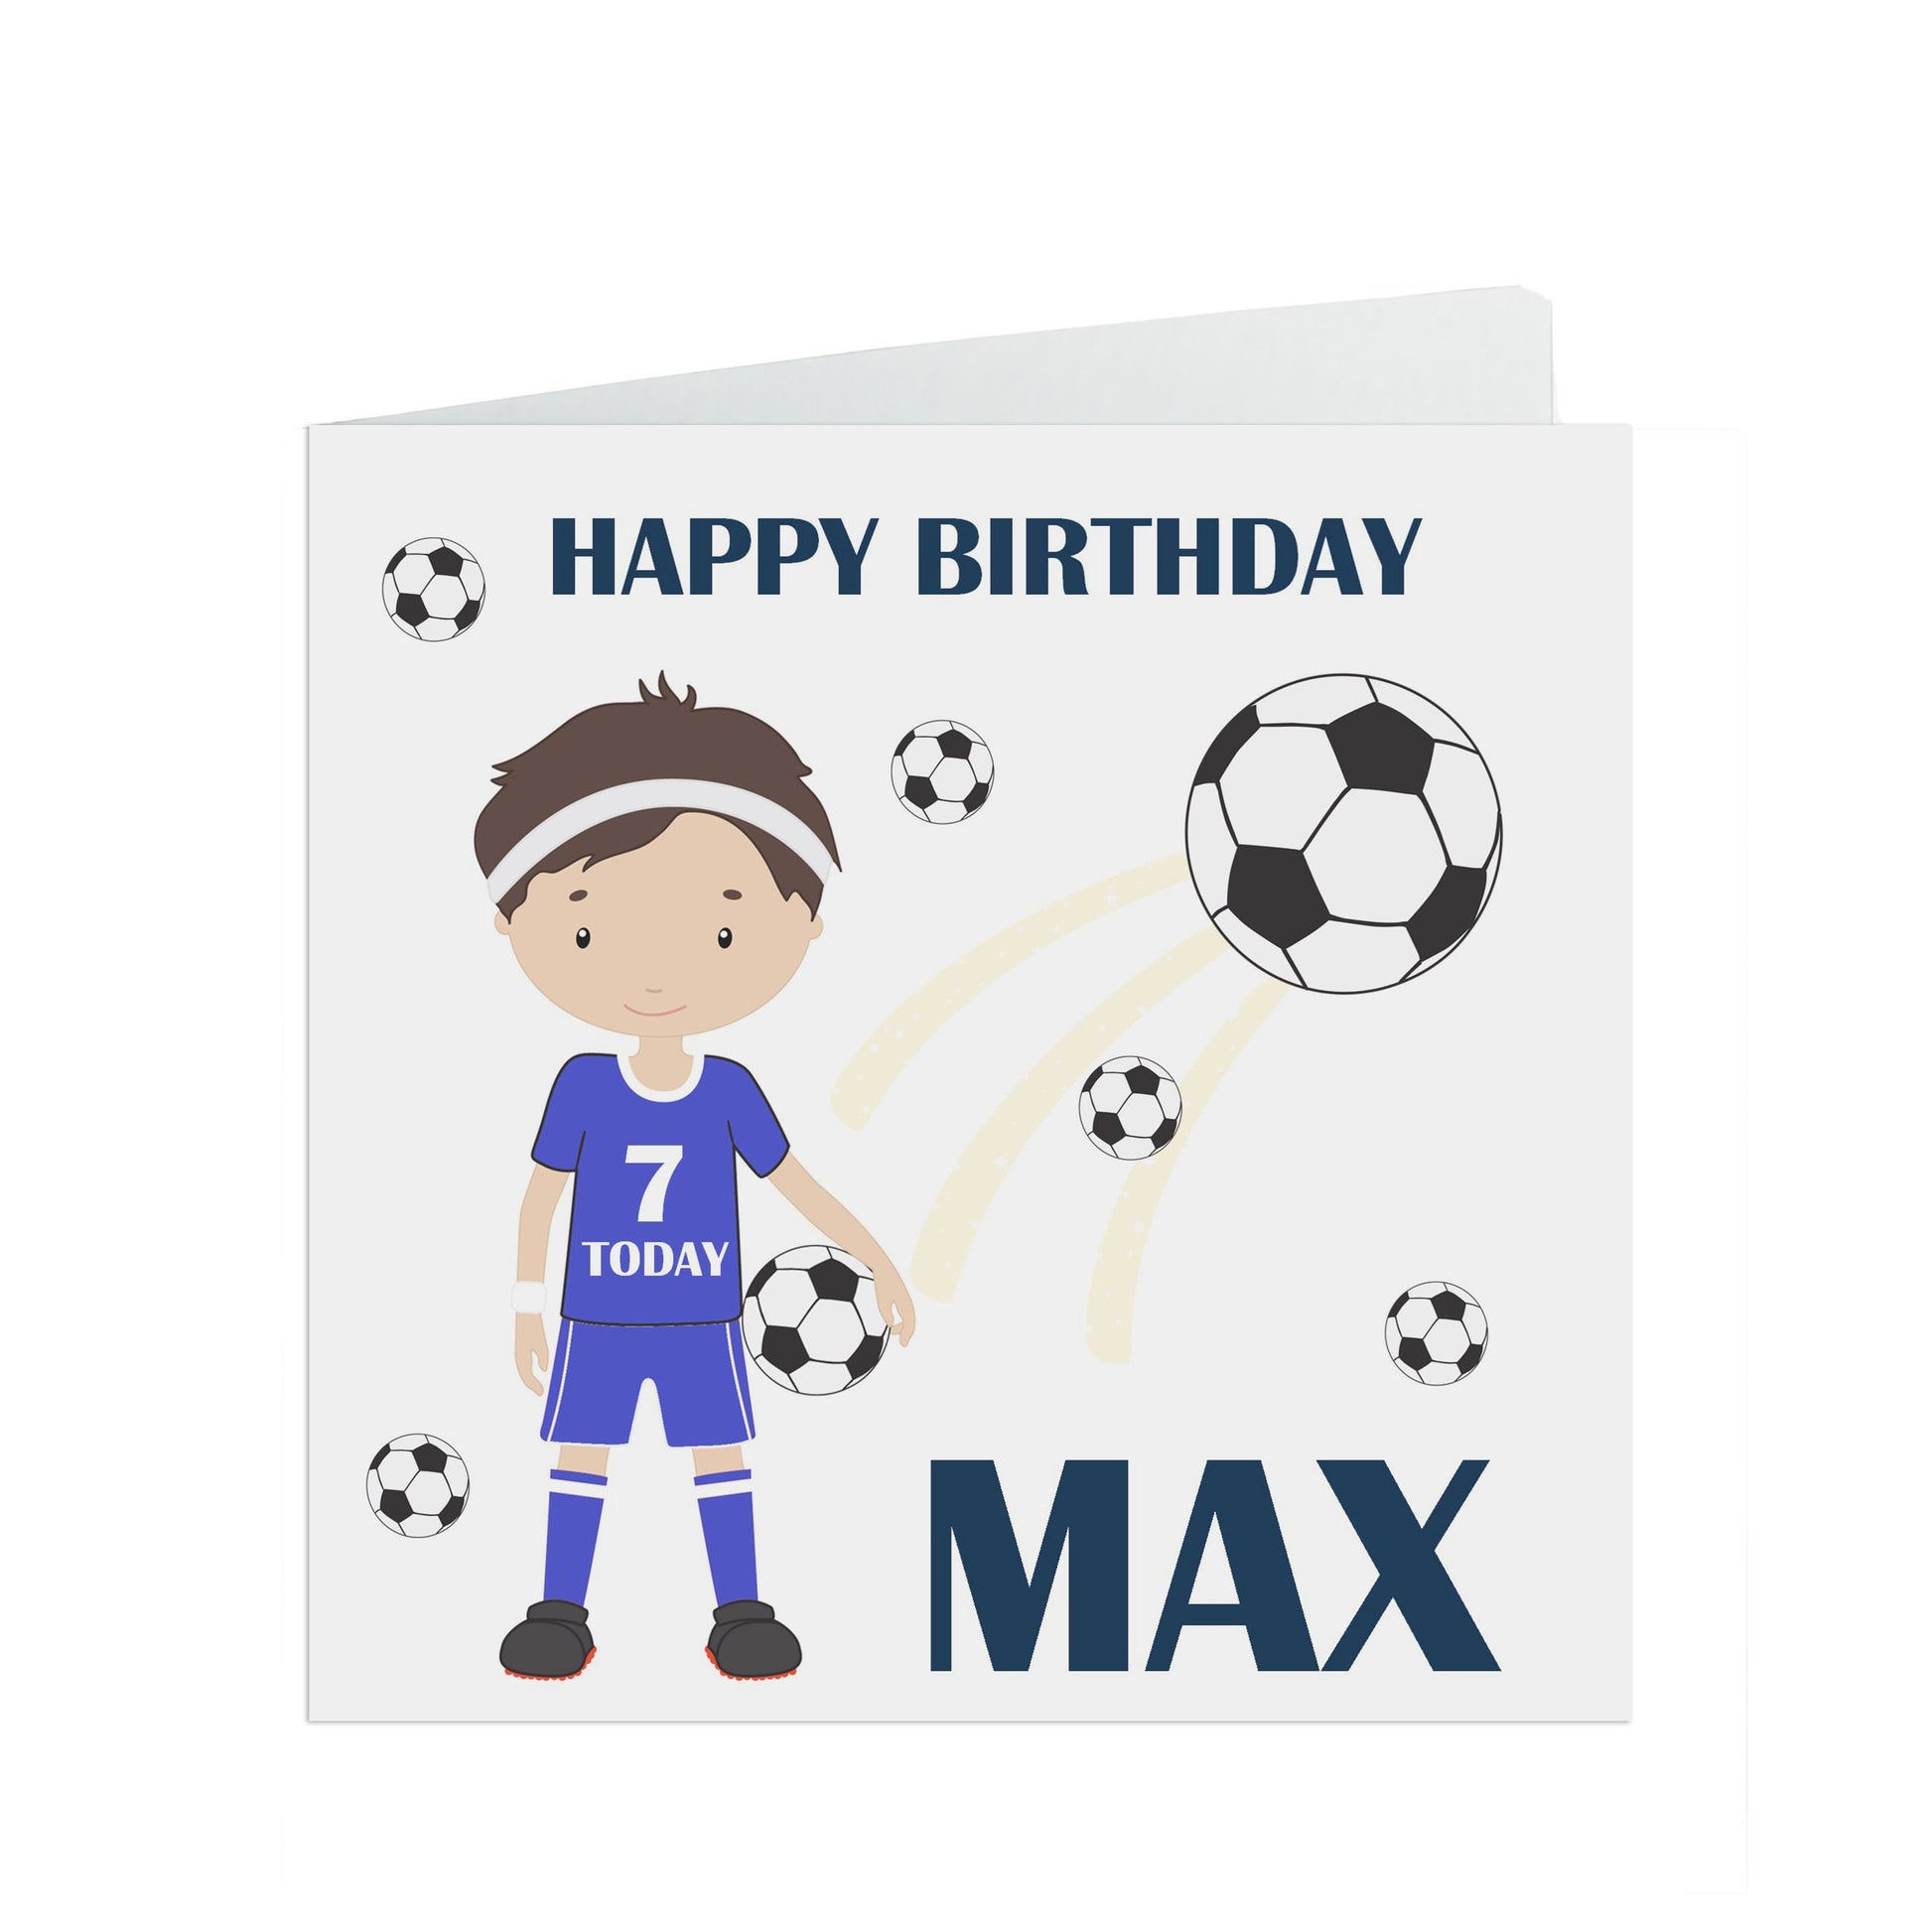 Personalised Football Birthday Card With Name and Age For Son, Nephew Or Grandson